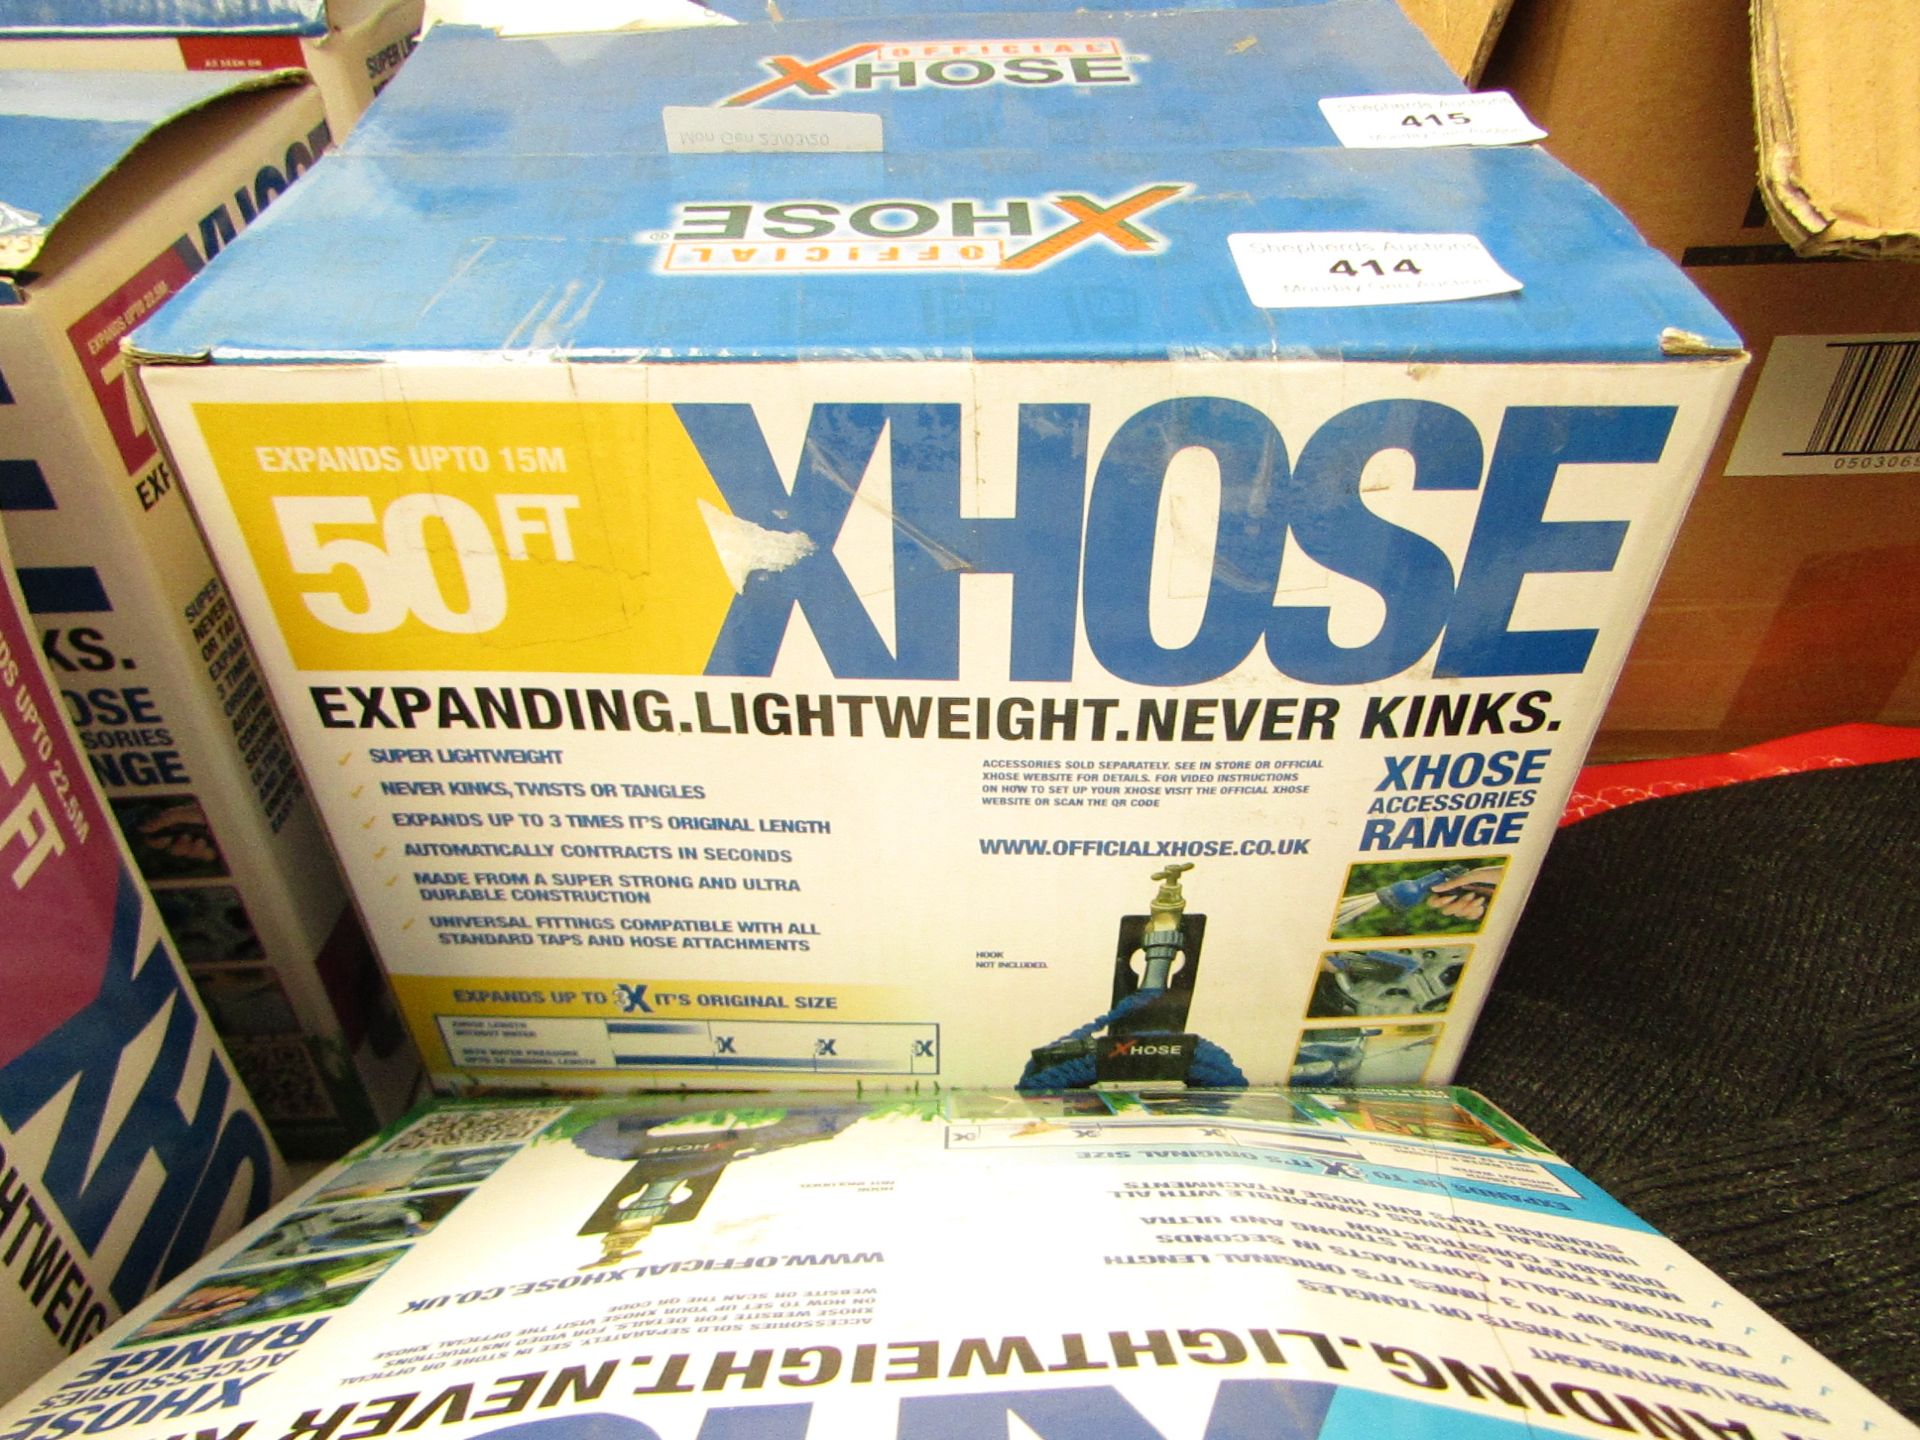 | 2X | XHOSE 50FT | UNCHECKED AND BOXED | NO ONLINE RE-SALE | SKU C5060191461078 | RRP £29:99 |